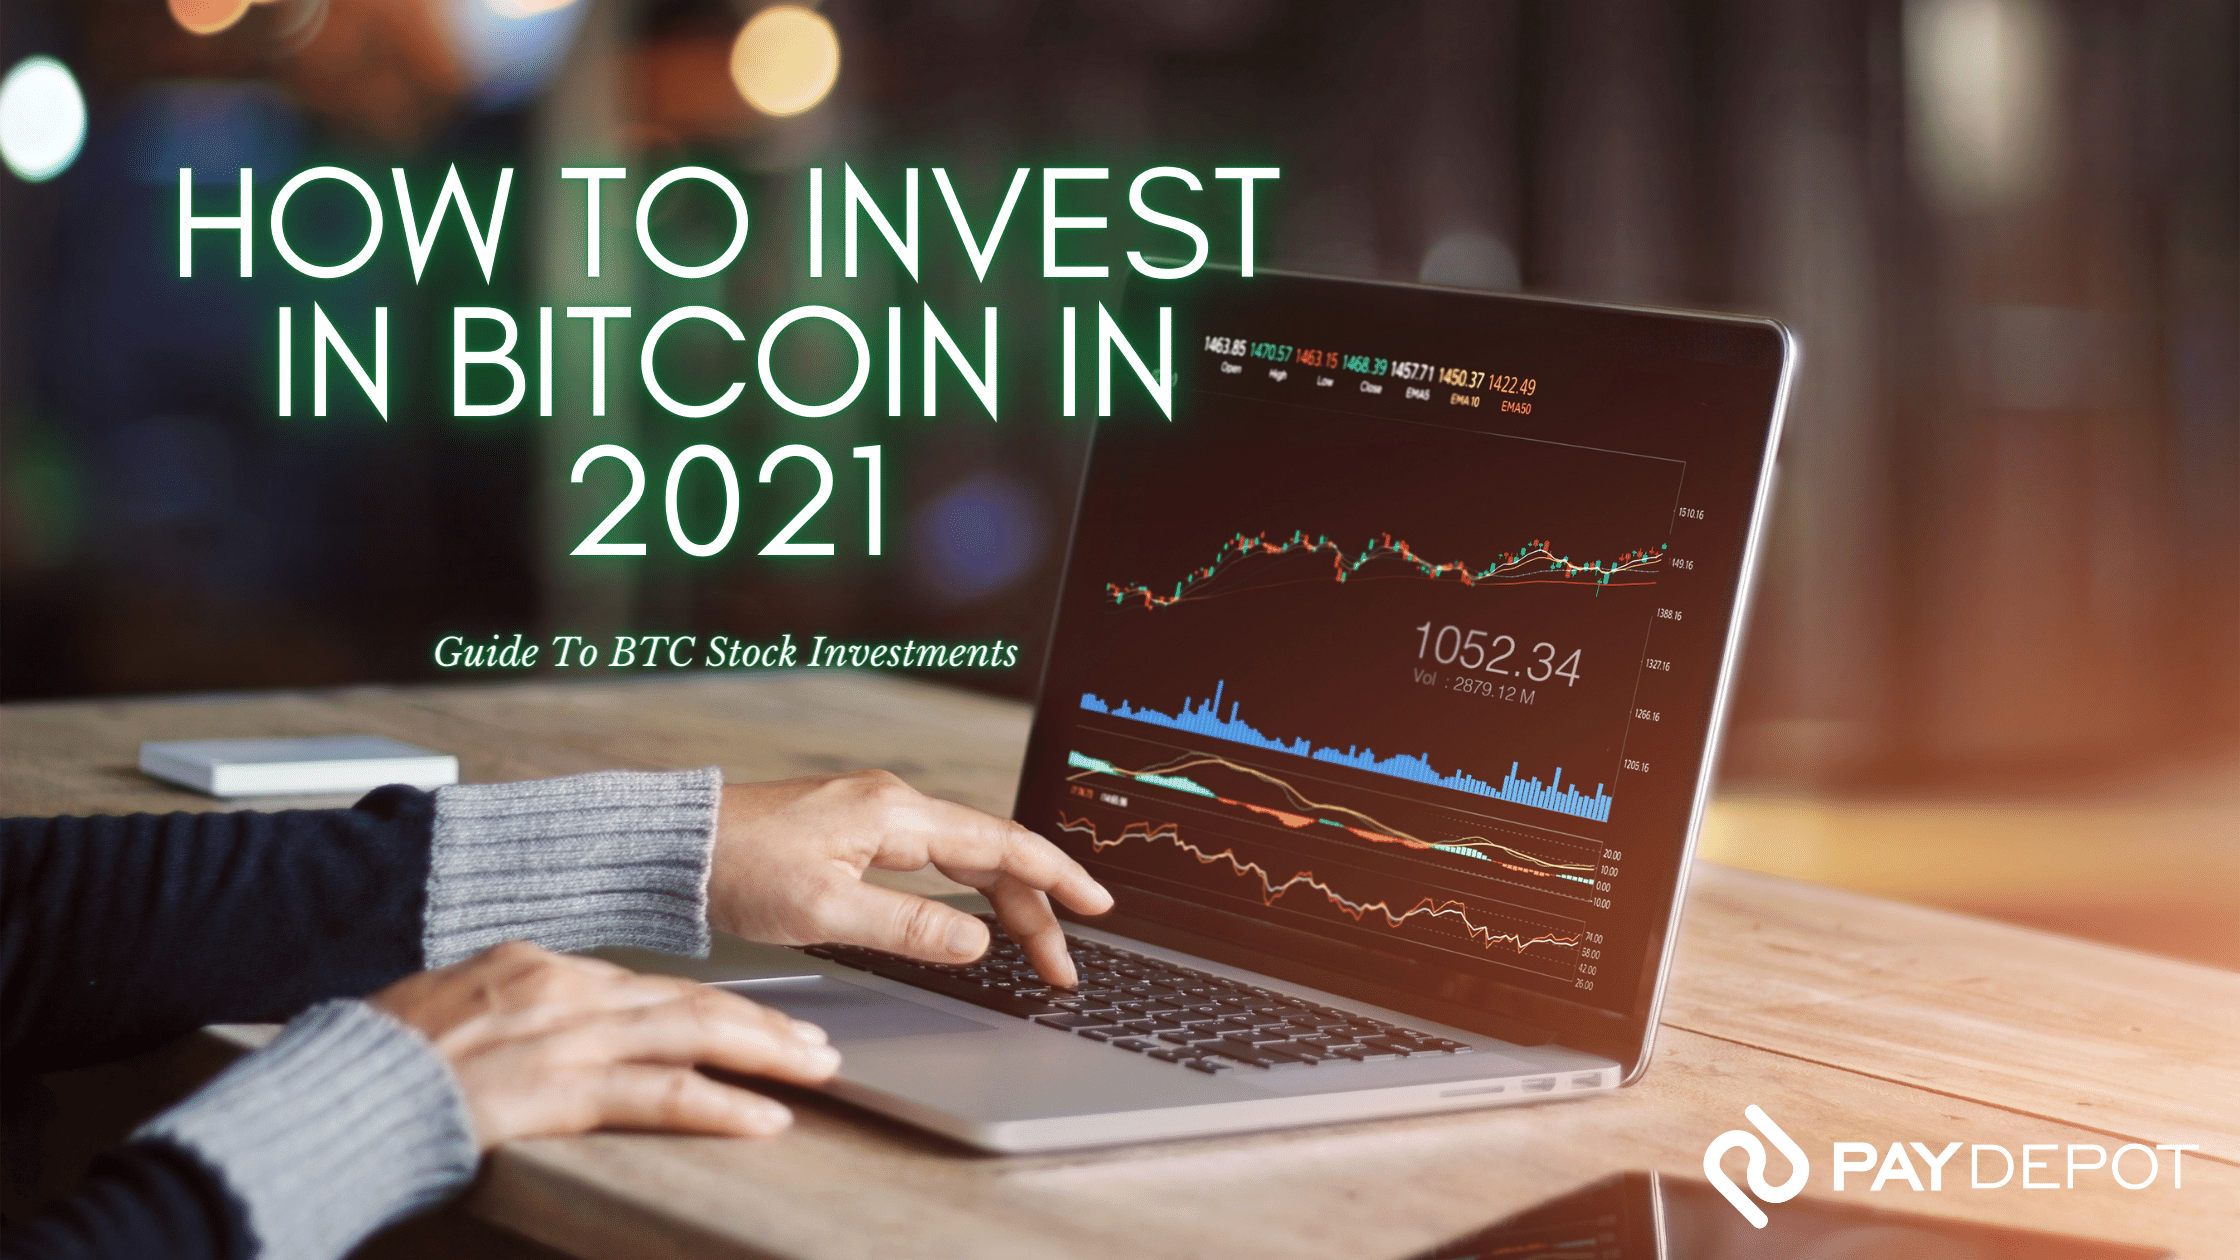 How to Invest in Bitcoin in 2021 - Guide to BTC Stock Investments